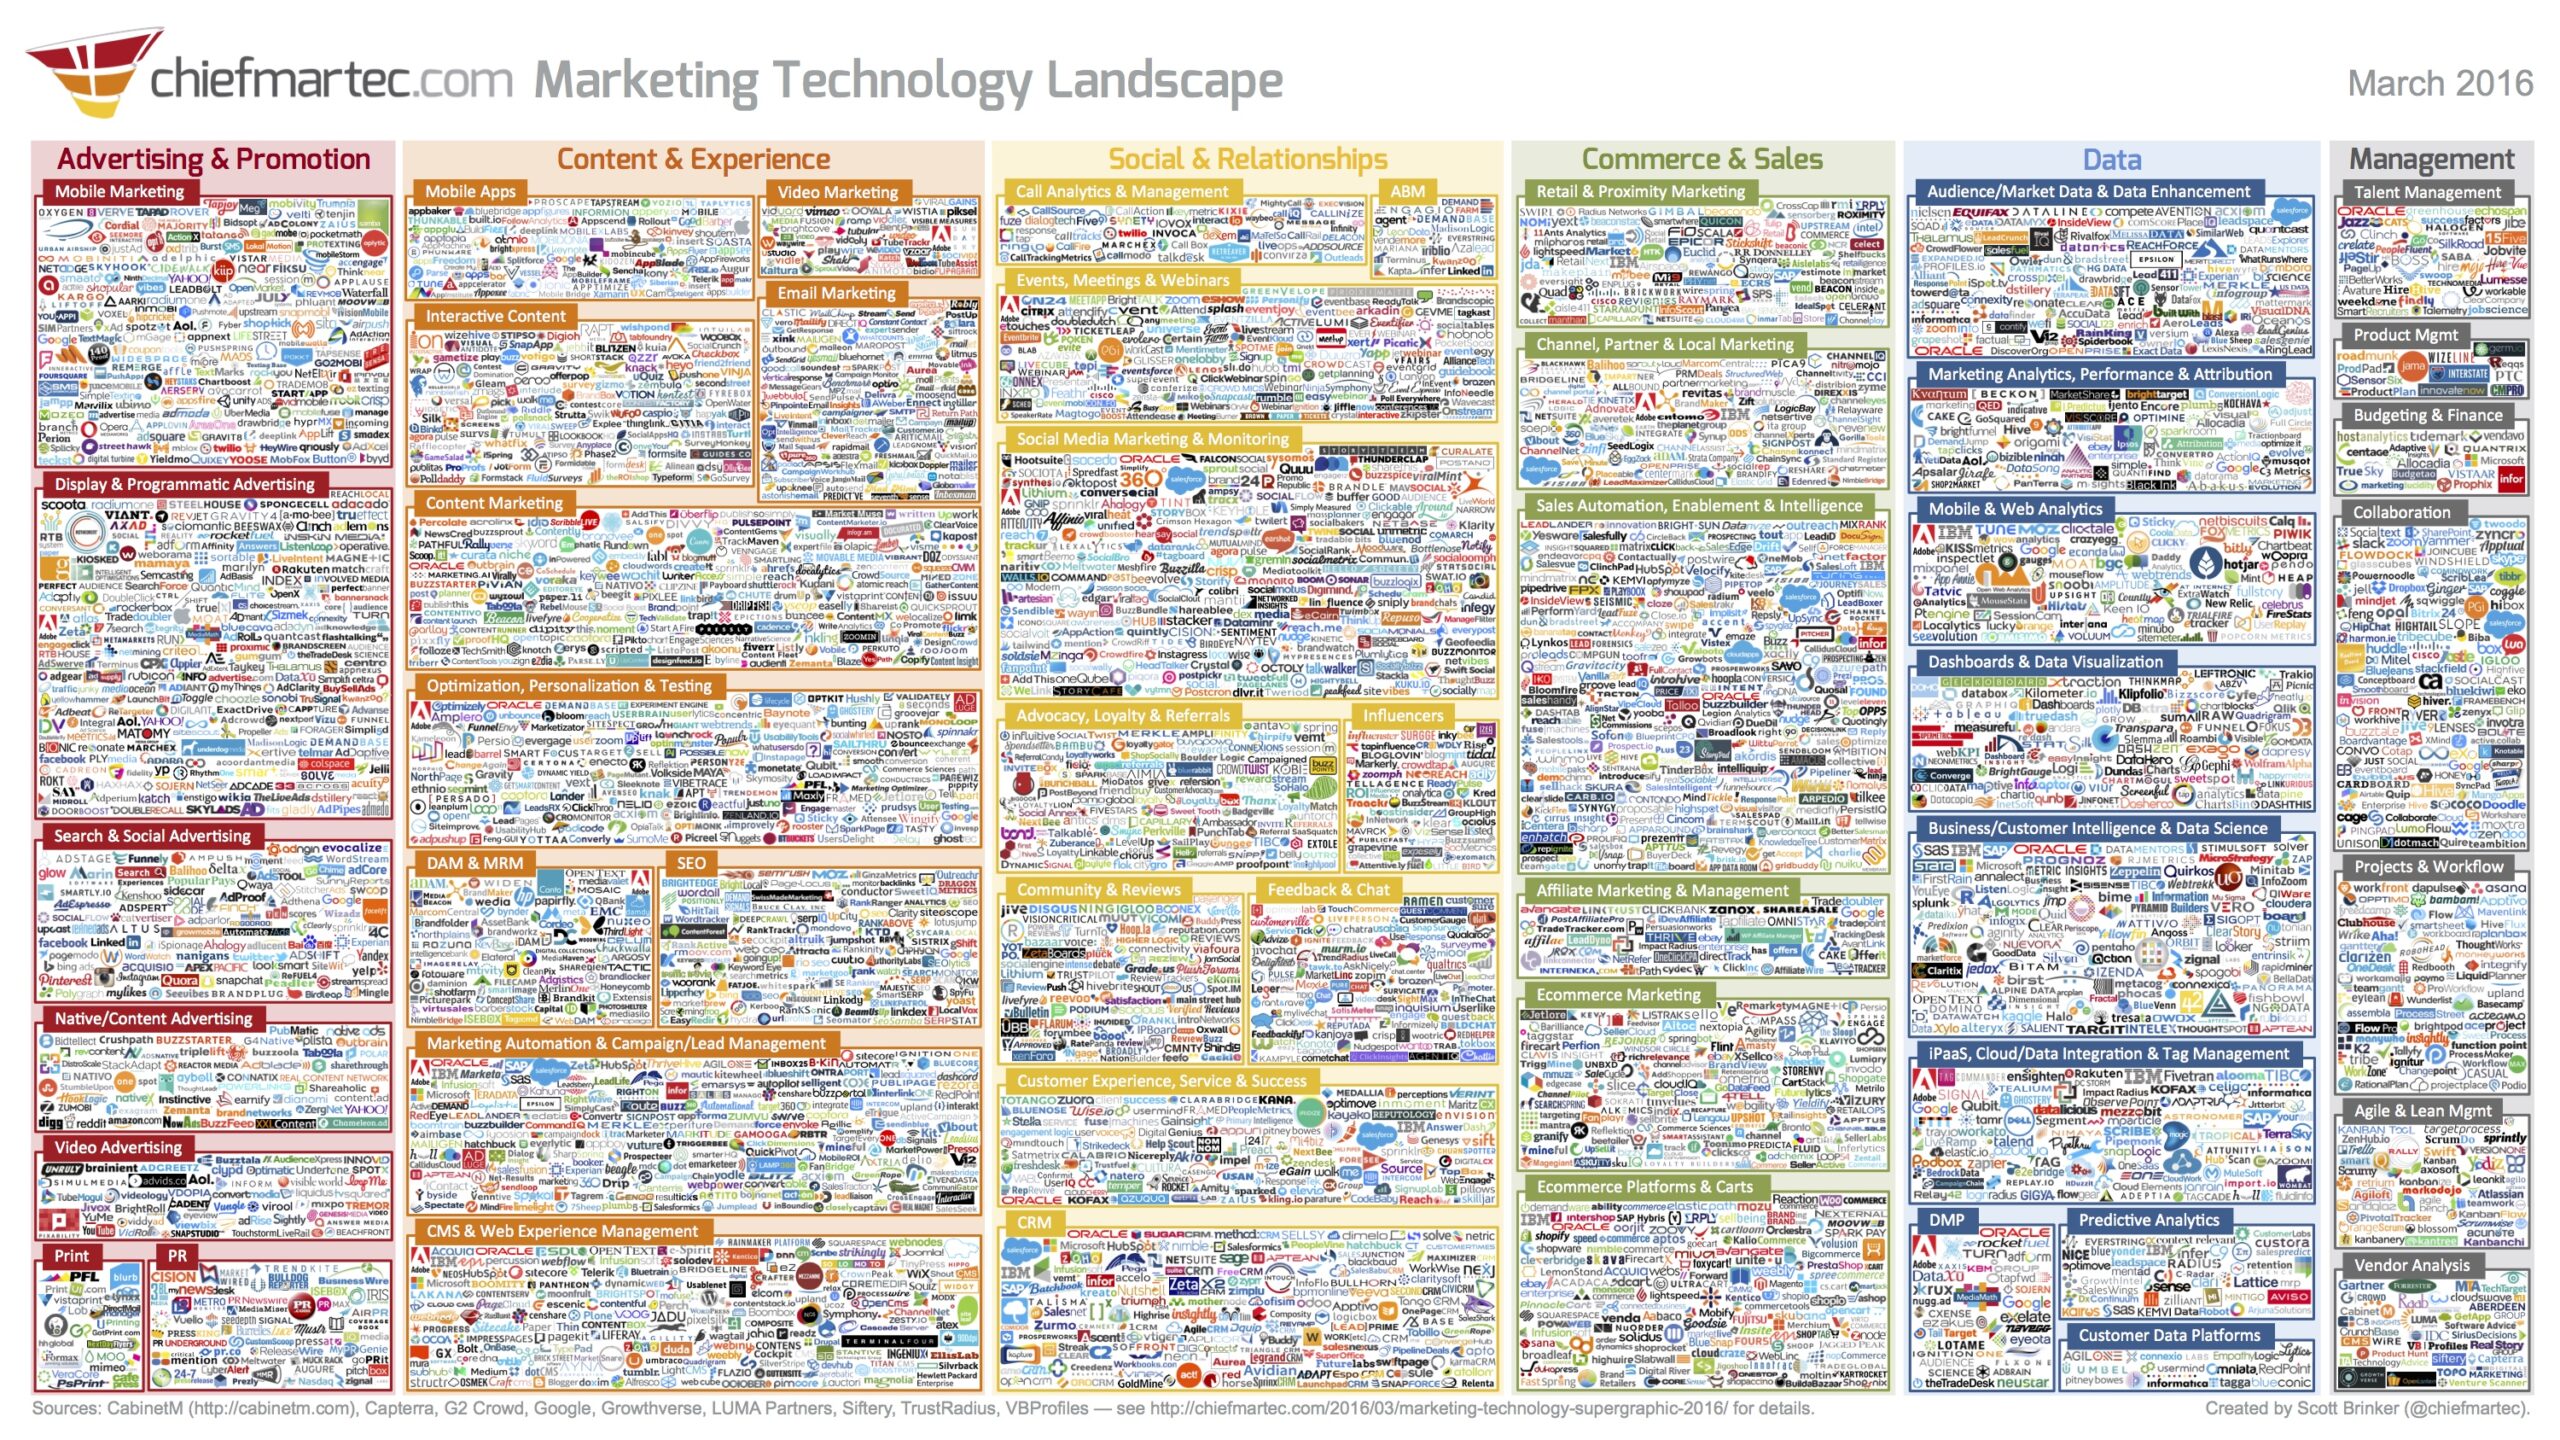 2016 Marketing Technology Landscape by Scott Brinker  - and it's as overwhelming as ever.